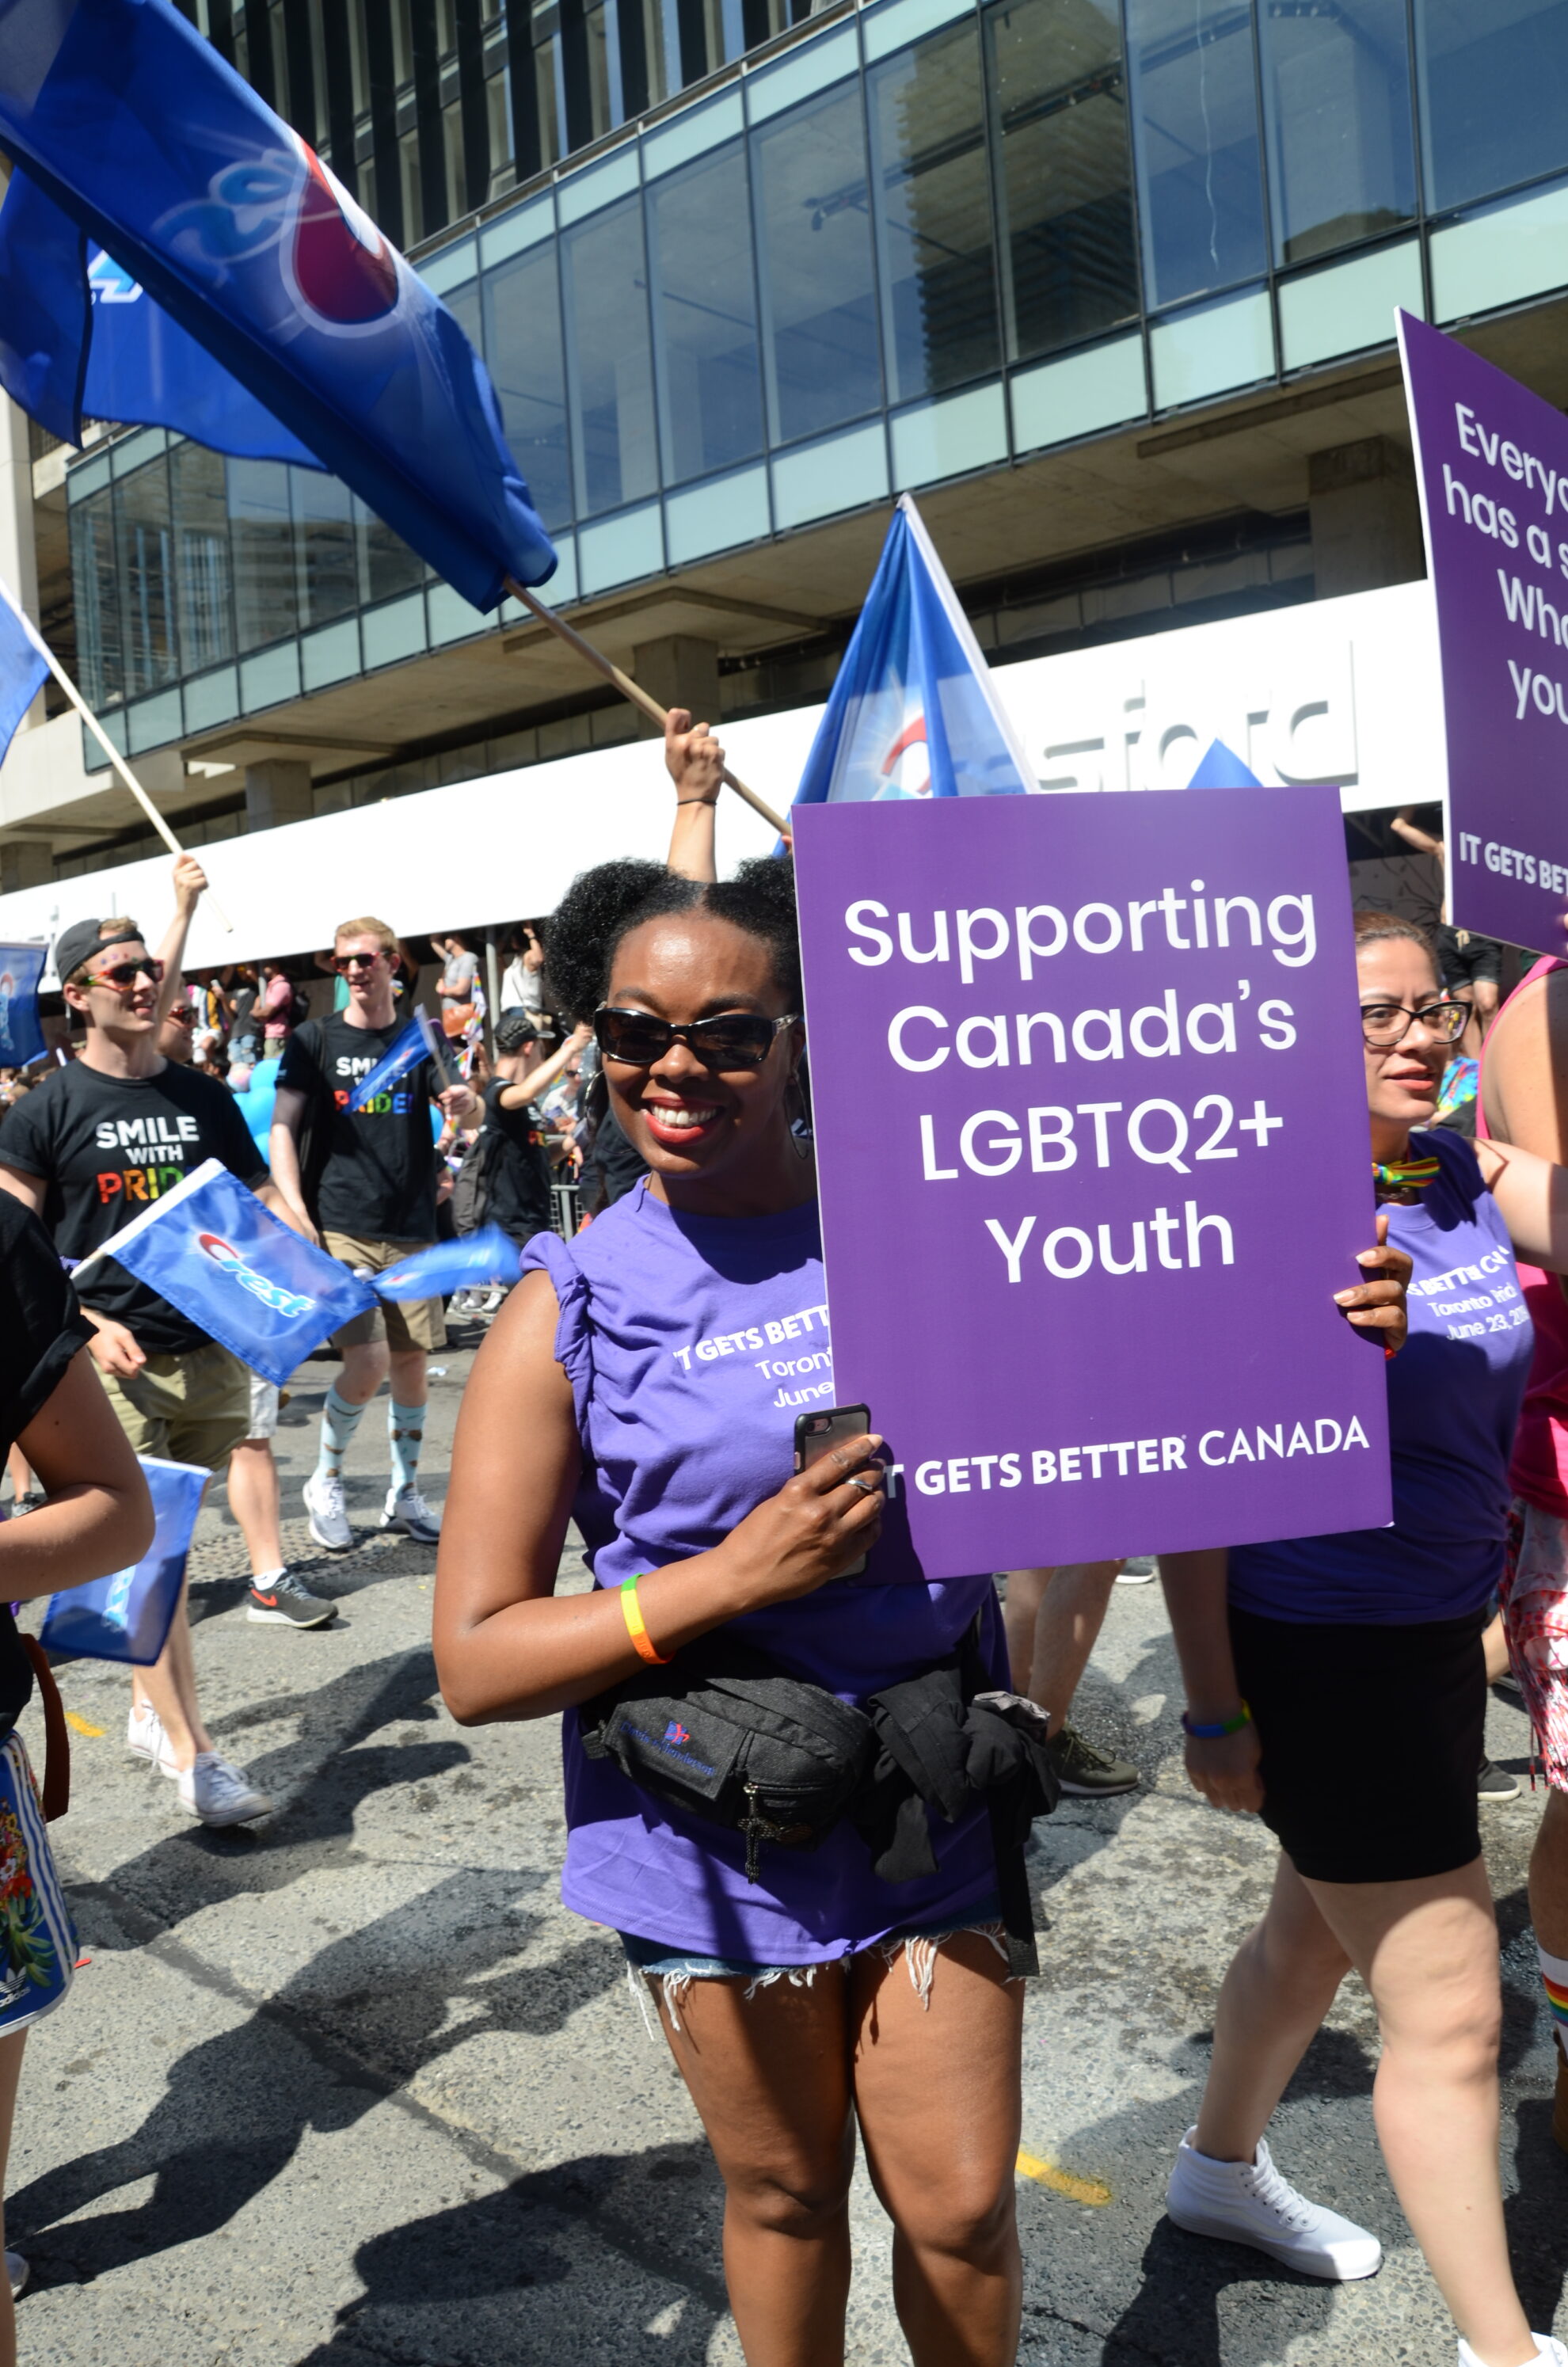 Person holding a, "Supporting Canada's LGBTQ2+ Youth. It Gets Better Canada" sign.